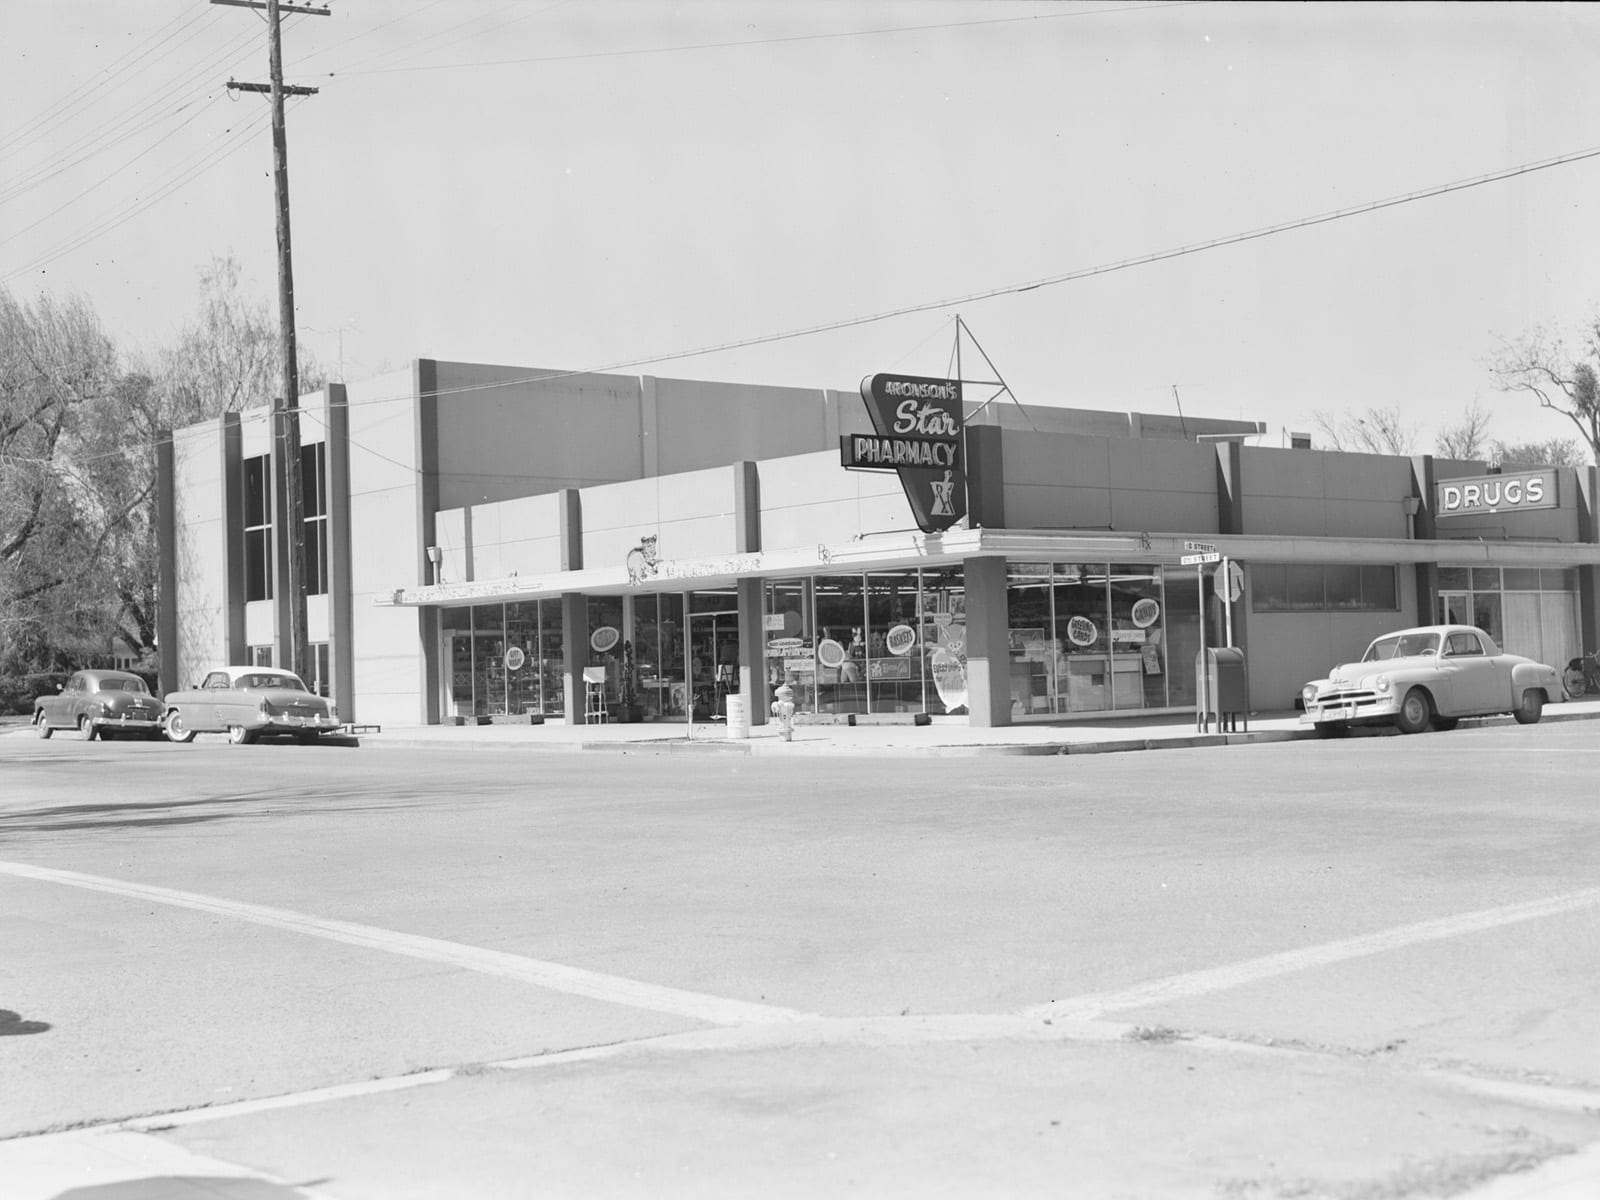 Second and D streets, looking northwest, 1957